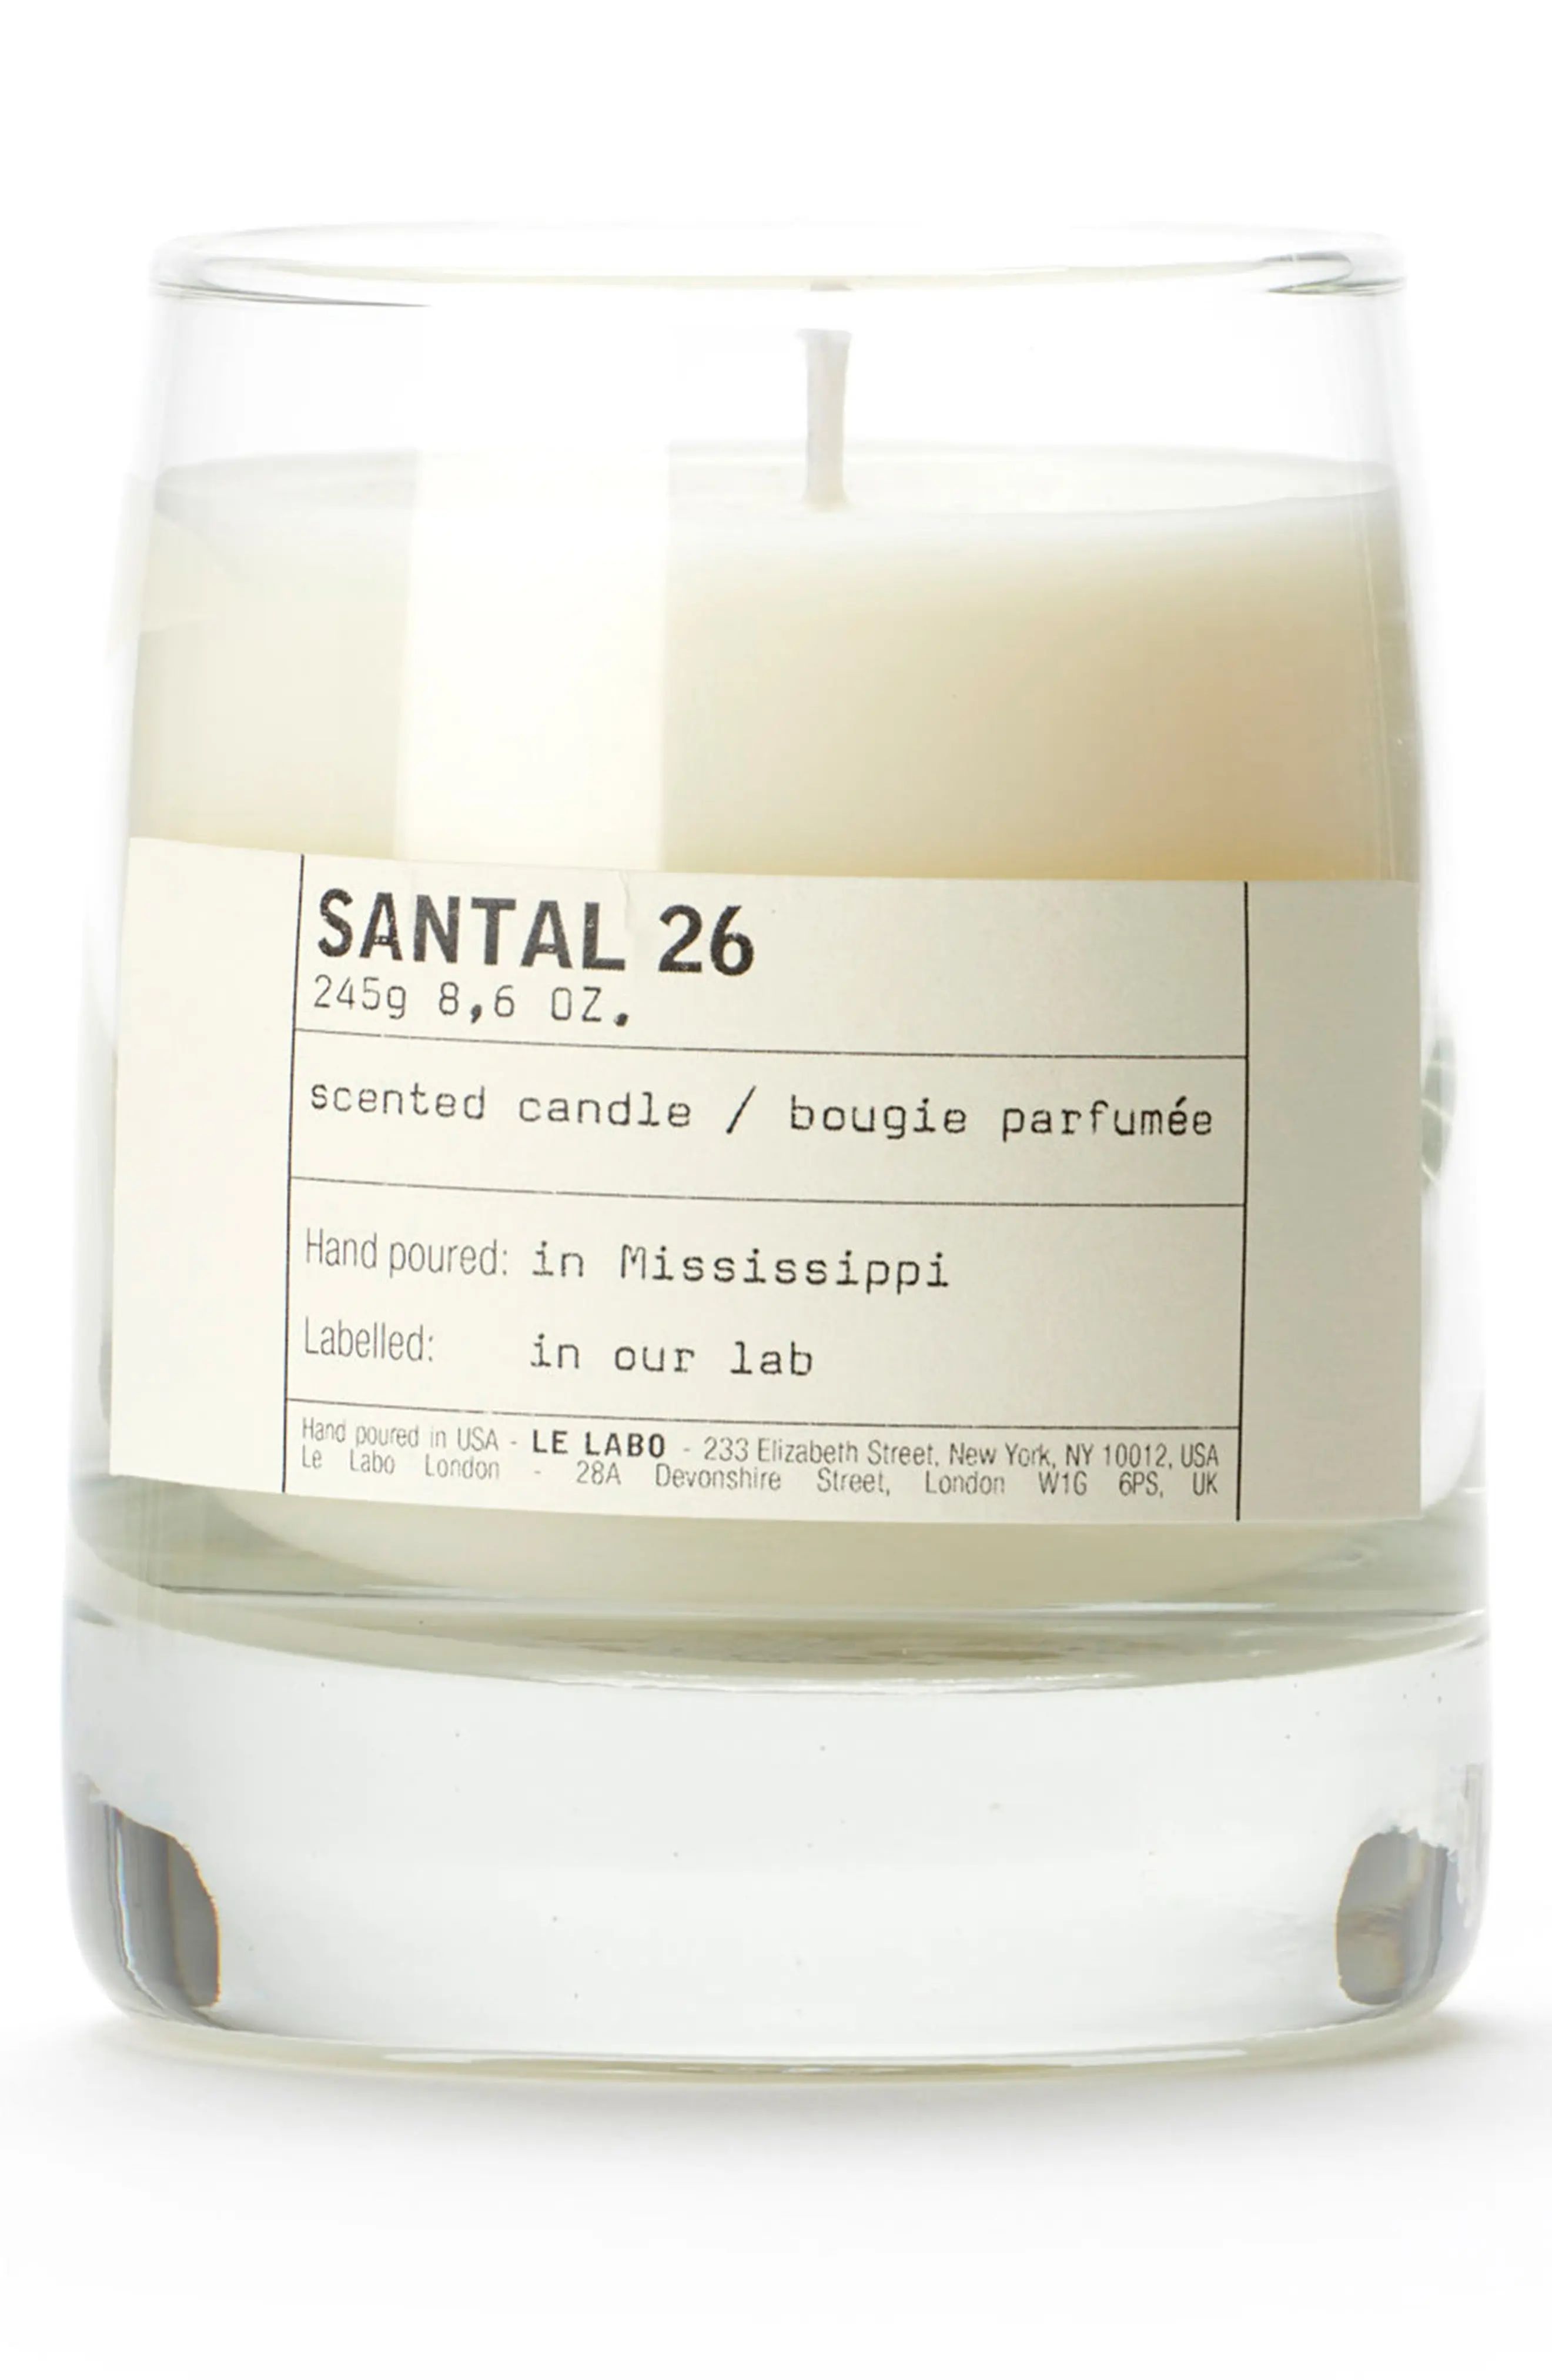 Le Labo Santal 26 Classic Candle at Nordstrom | Nordstrom